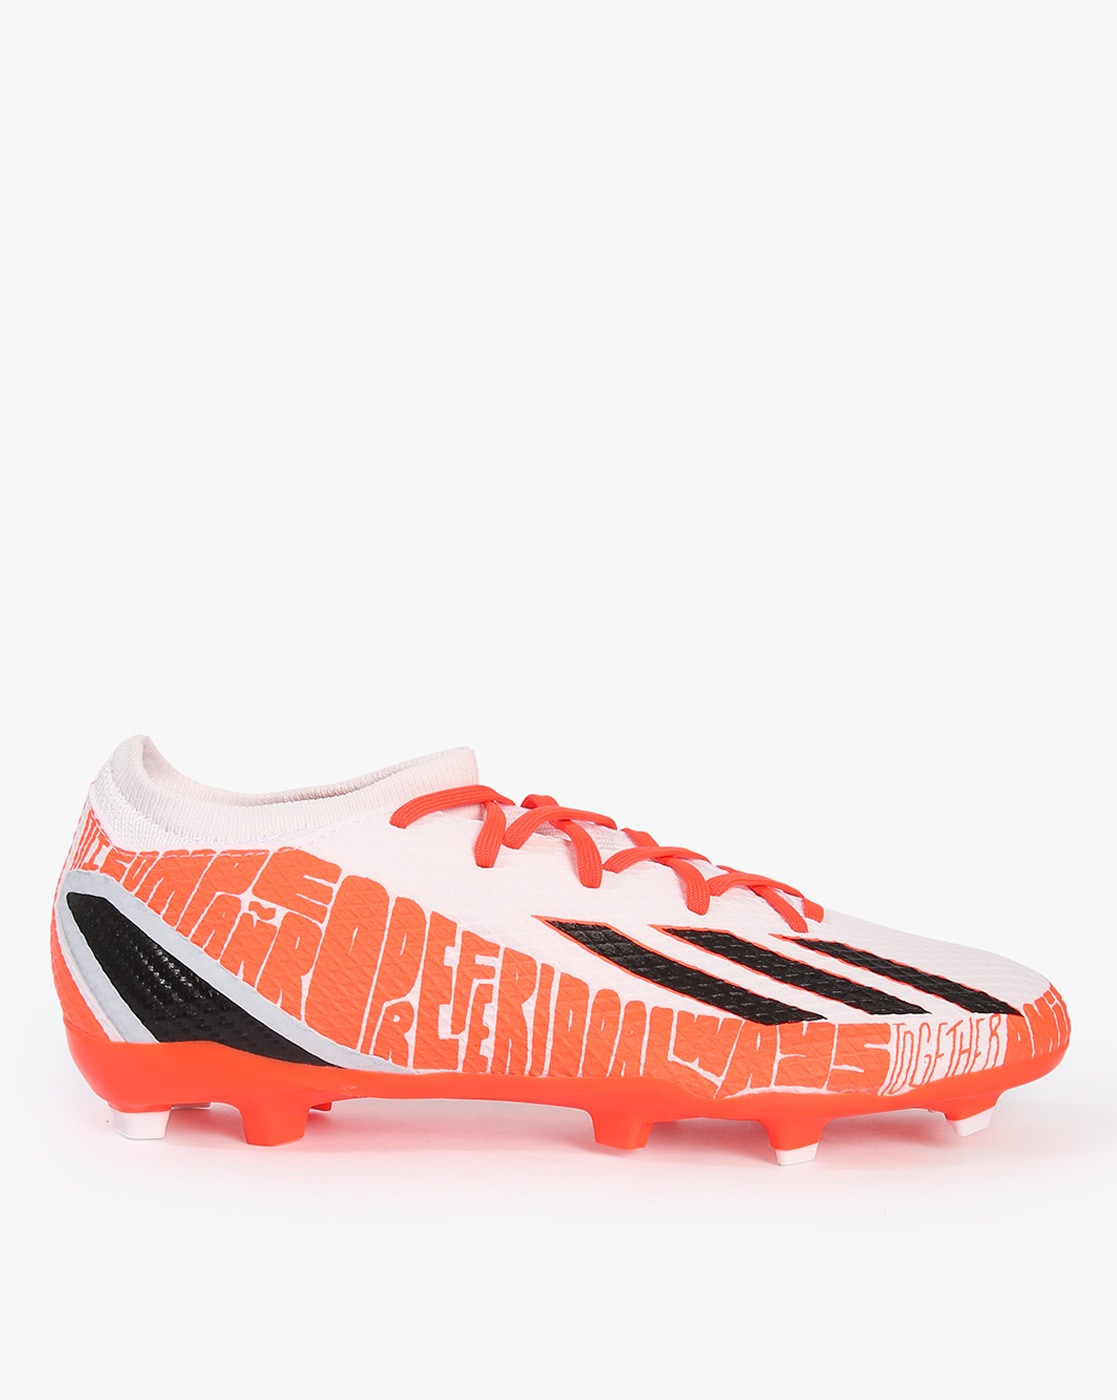 Newest Speedmate Branches Soccer Shoes 39-45 FG Mercurial Superfly 360 Football  Boots Messi mercurial vapor 12 Futsal Sneakers - buy Newest Speedmate  Branches Soccer Shoes 39-45 FG Mercurial Superfly 360 Football Boots